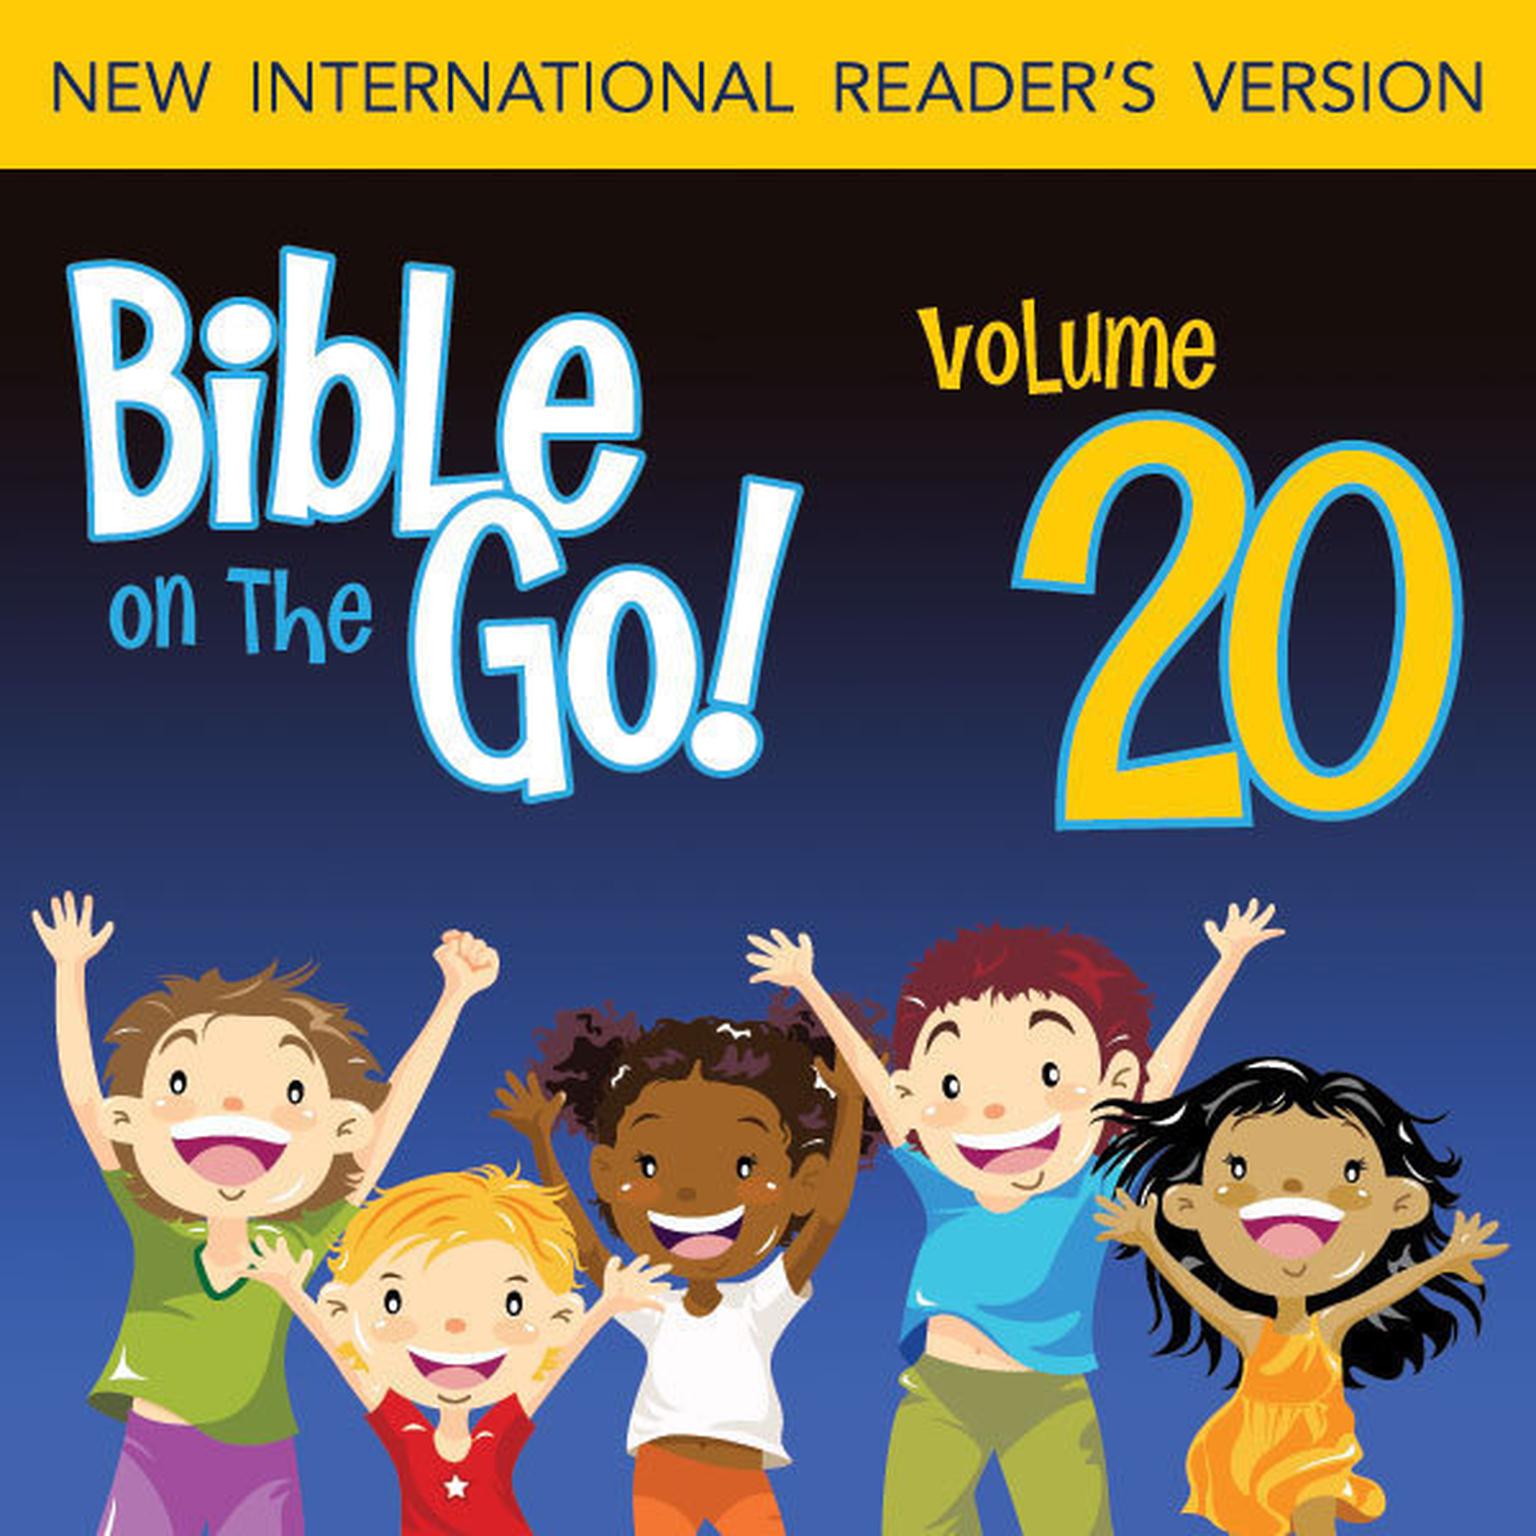 Bible on the Go Audio Bible - New International Readers Version, NIrV: Vol. 20 The Story of Elisha (2 Kings 4-5, 17; 2 Chronicles 24) Audiobook, by Zondervan